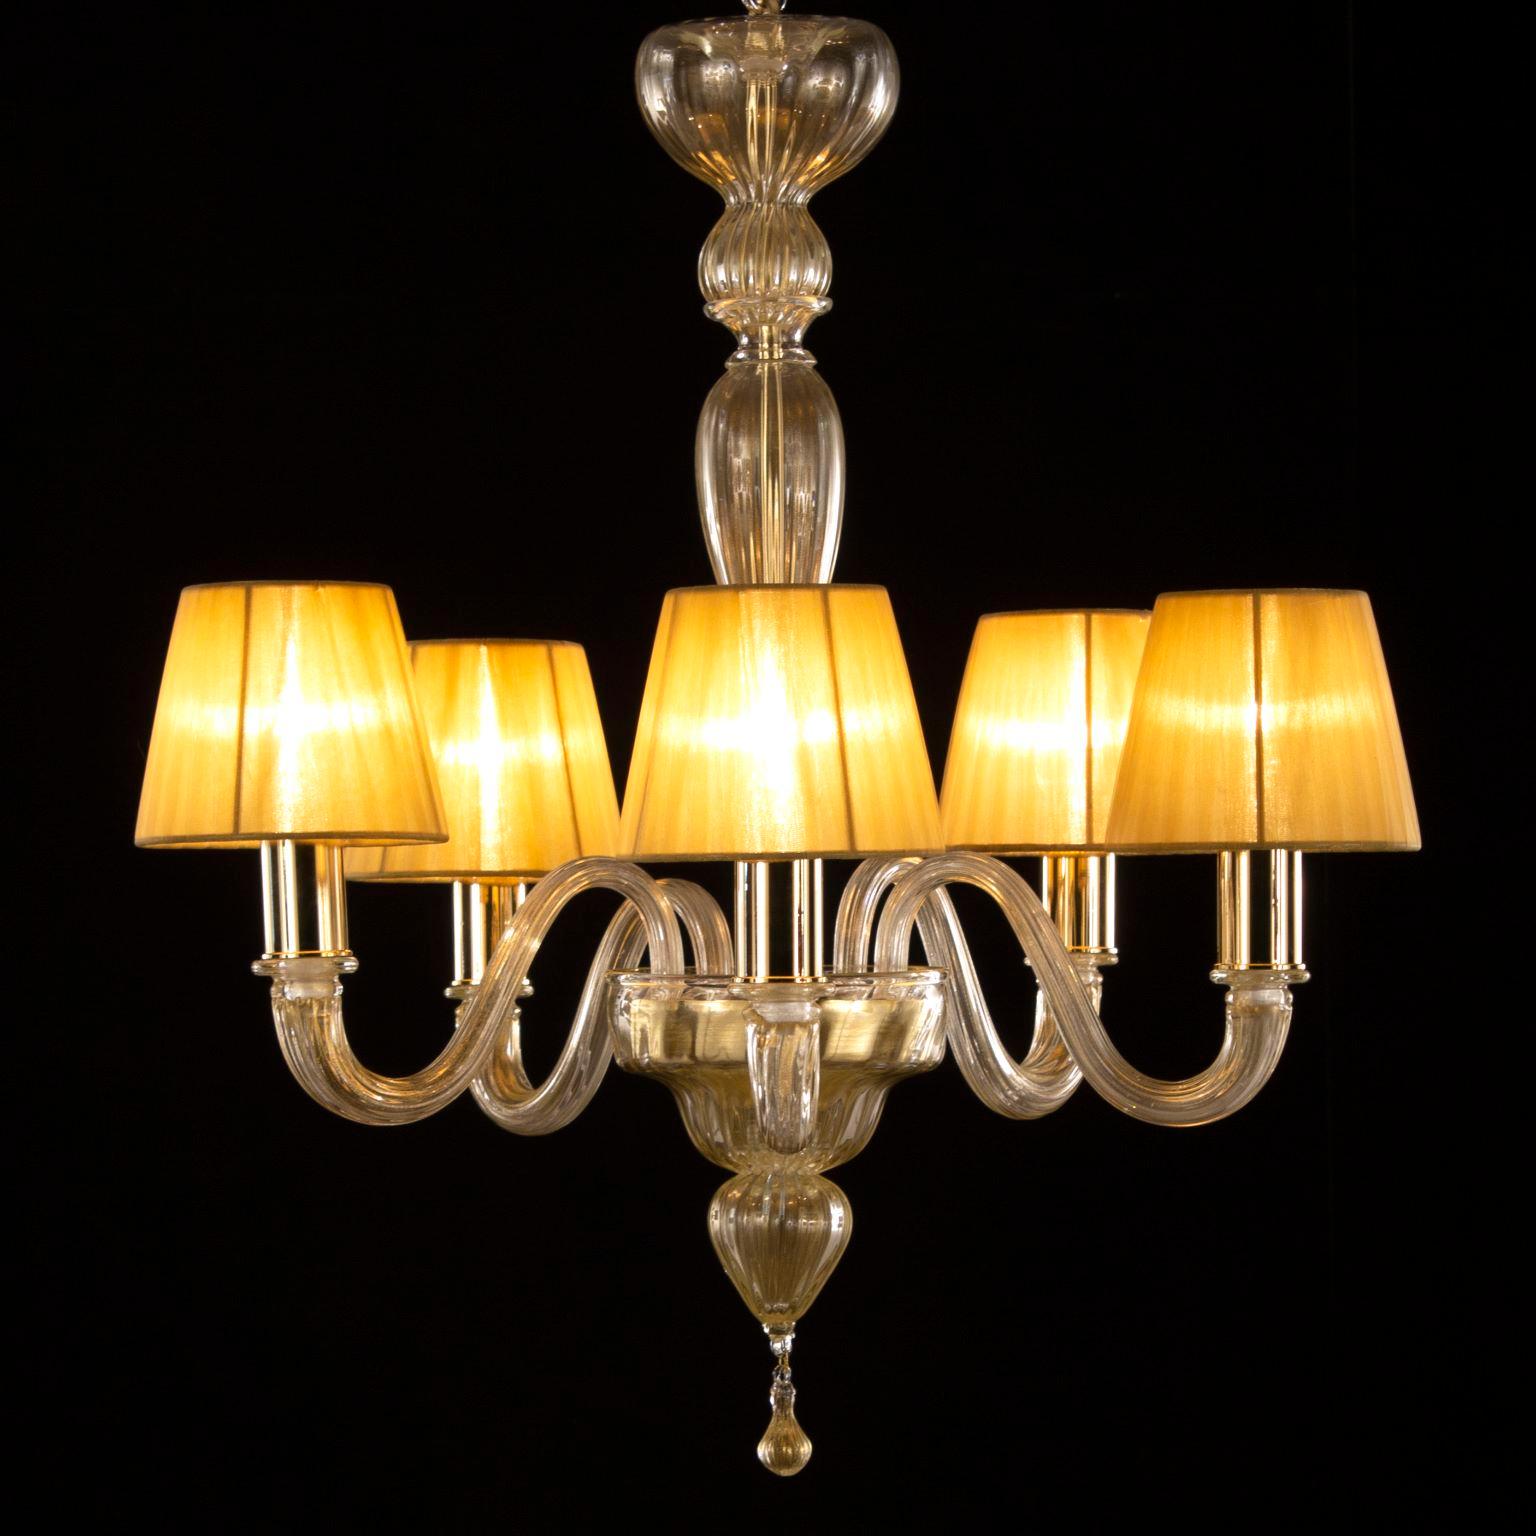 Chapeau chandelier 5-light artistic golden leaf Murano glass, amber organza handmade in Florence lampshades by Multiforme.
 
Chapeau is a Classic and essential chandelier, it is handcrafted using high quality materials in murano glass and handmade